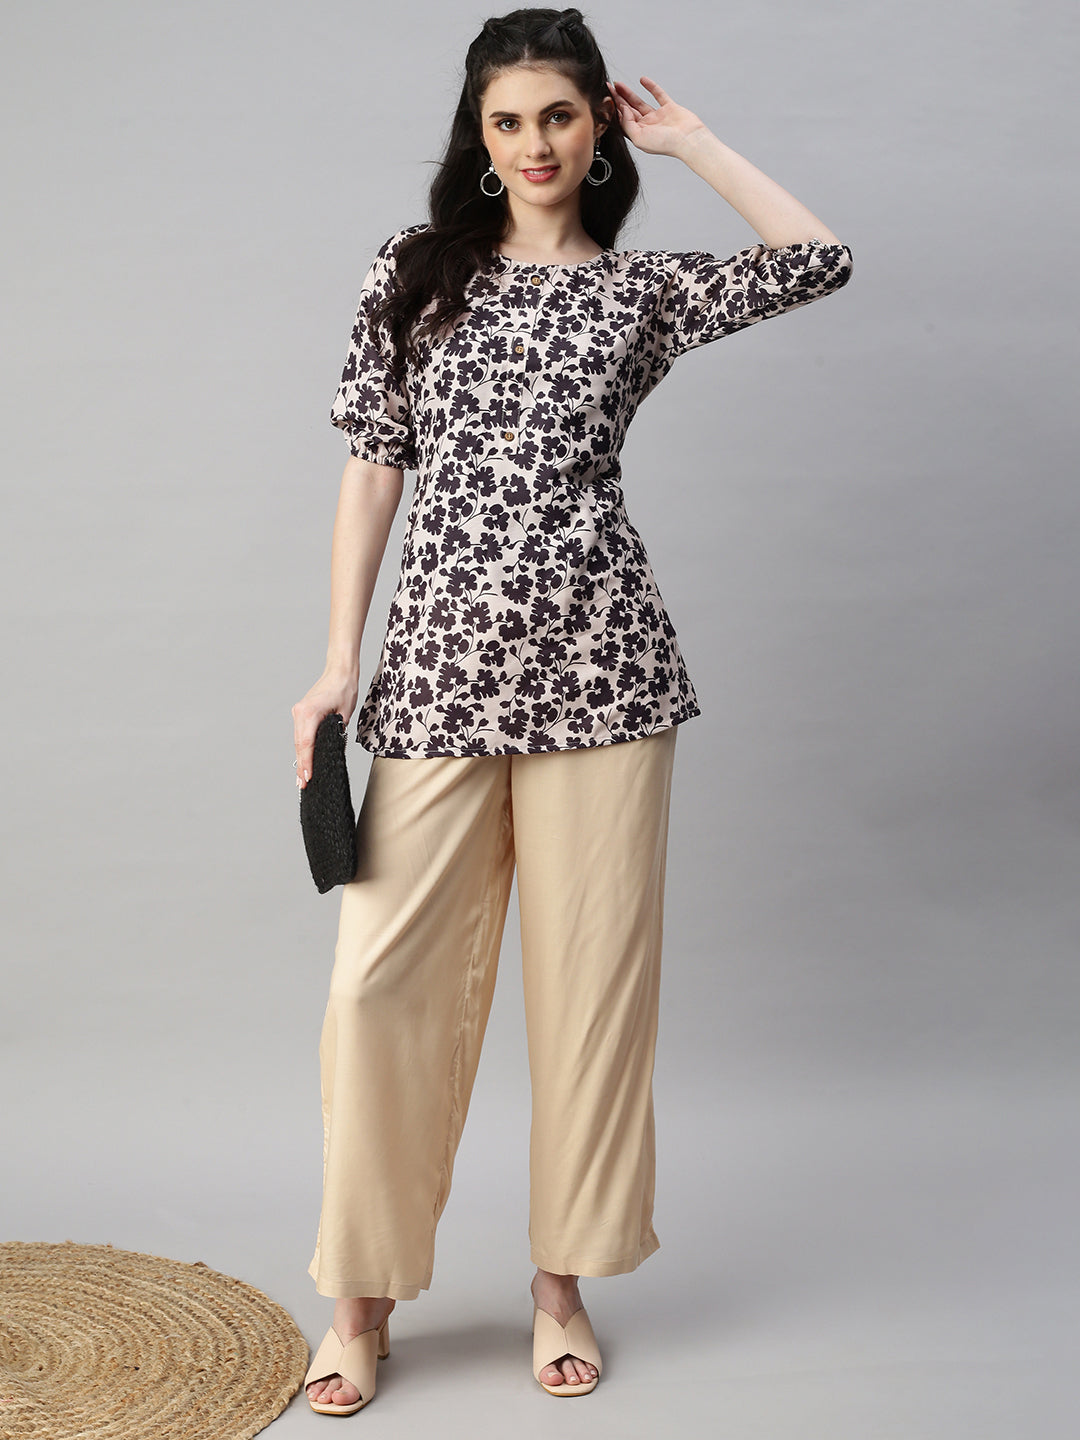 This elegant kurta is comfortable and filled with stylish elements like  upper pleats and billowy sleeves. Pair it with straight pants and a  statement neckpeice to complete your look.